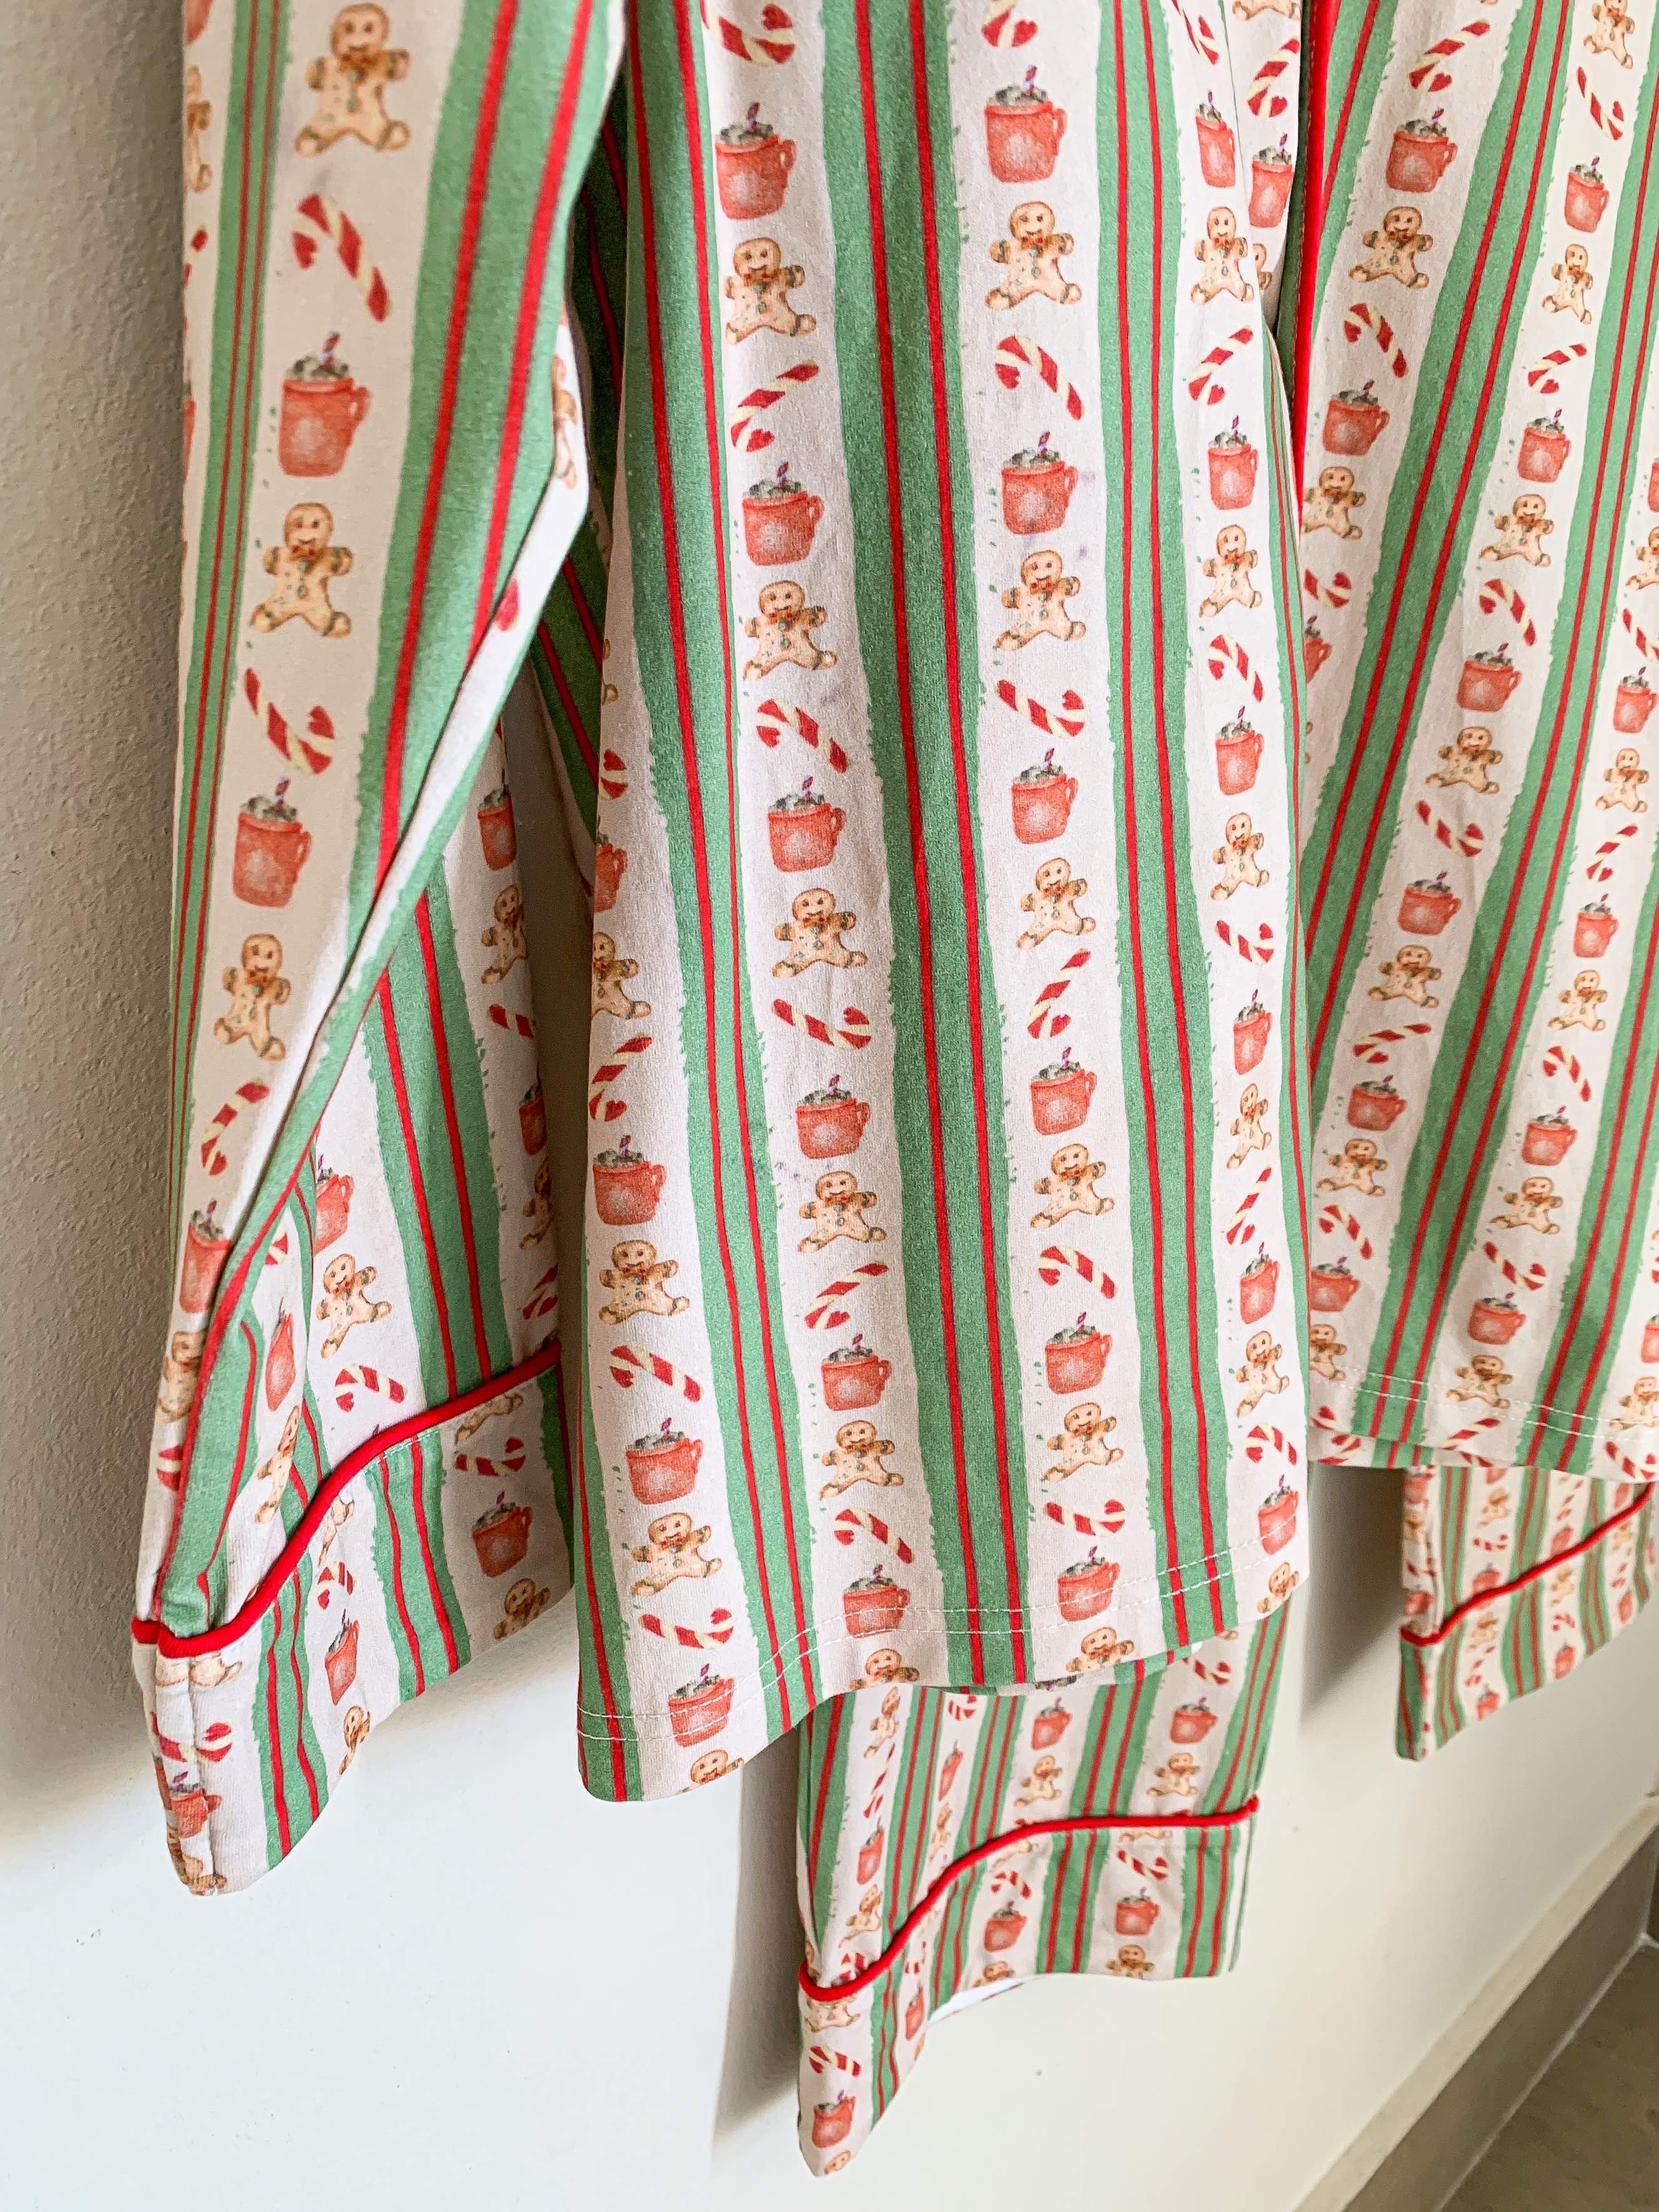 close up image of adult Christmas pjs. it shows the bottom part of the pants and also the arm of the top. the pattern is red and green with beige stripes that are patterned with Christmas icons like gingerbread.